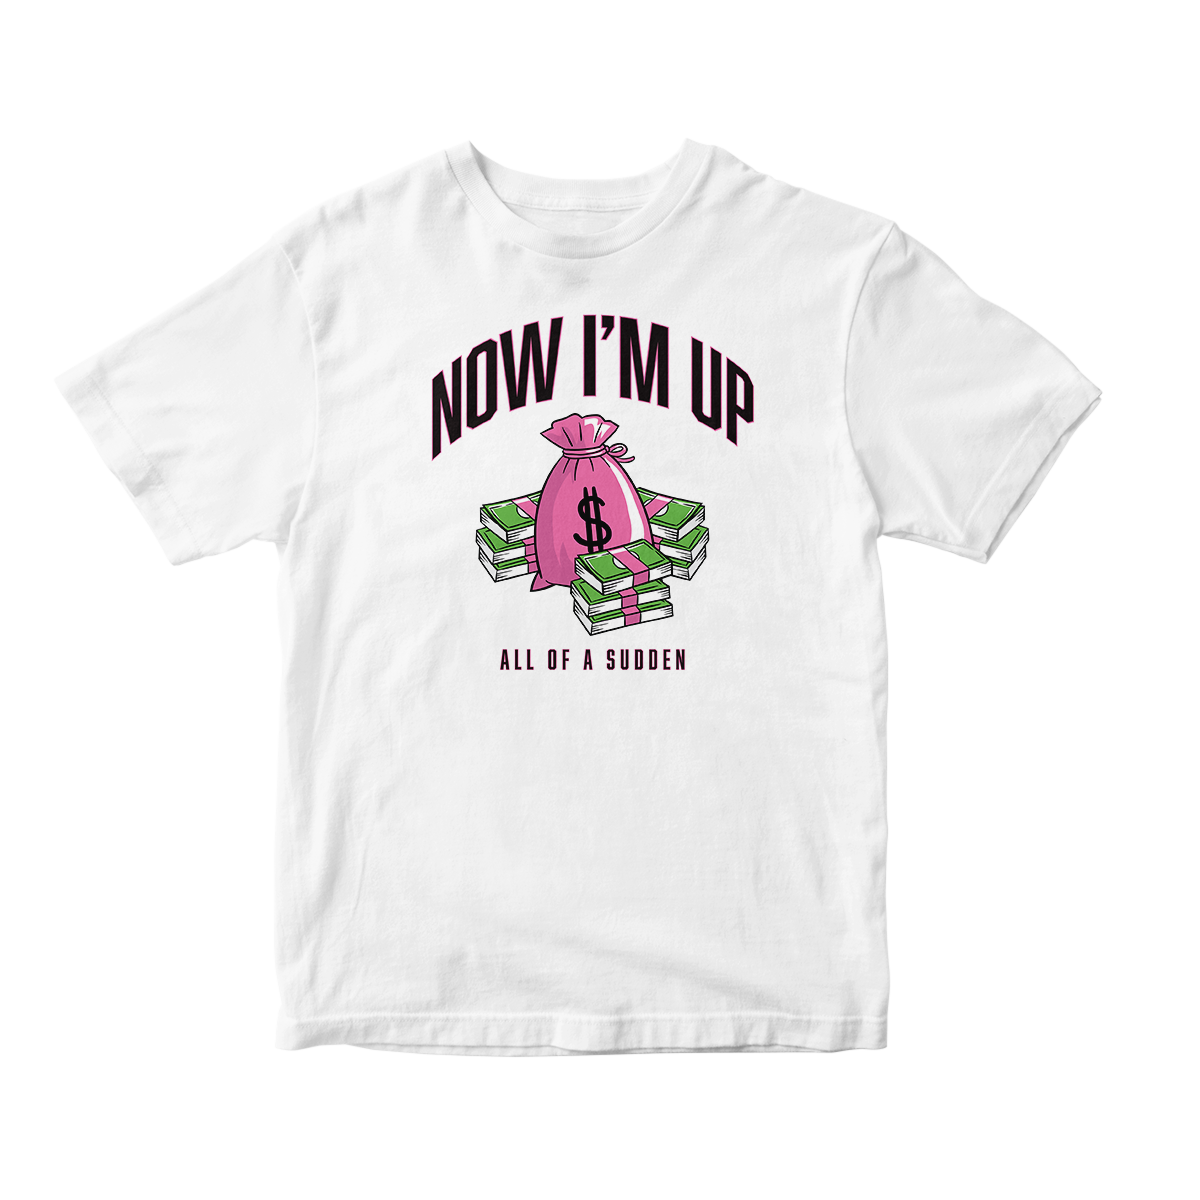 Now I'm Up in Pink Short Sleeve Tee